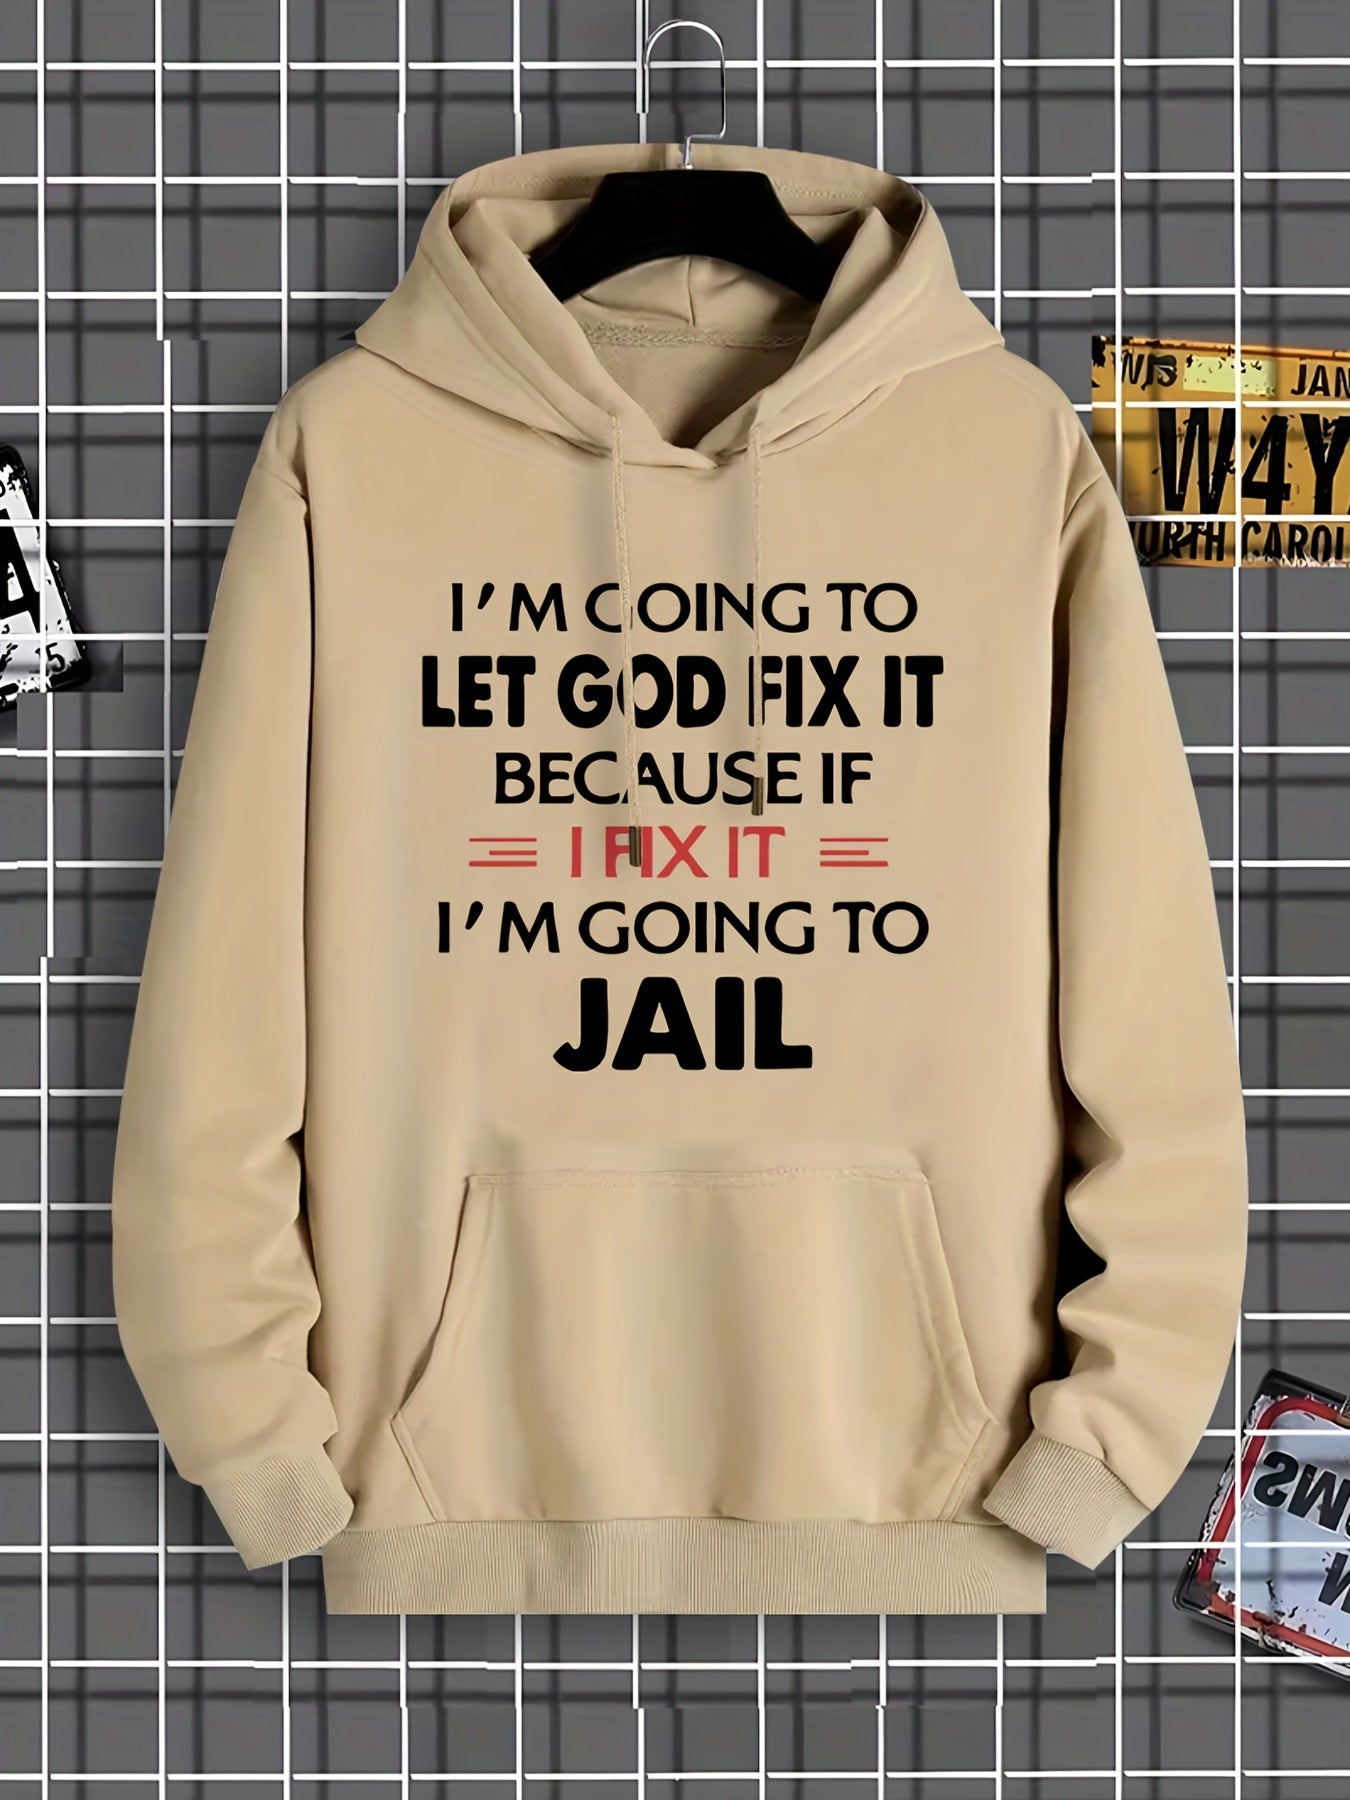 Let God Fix It Because If I Fix It I'm Going To Jail Unisex Christian Pullover Hooded Sweatshirt claimedbygoddesigns